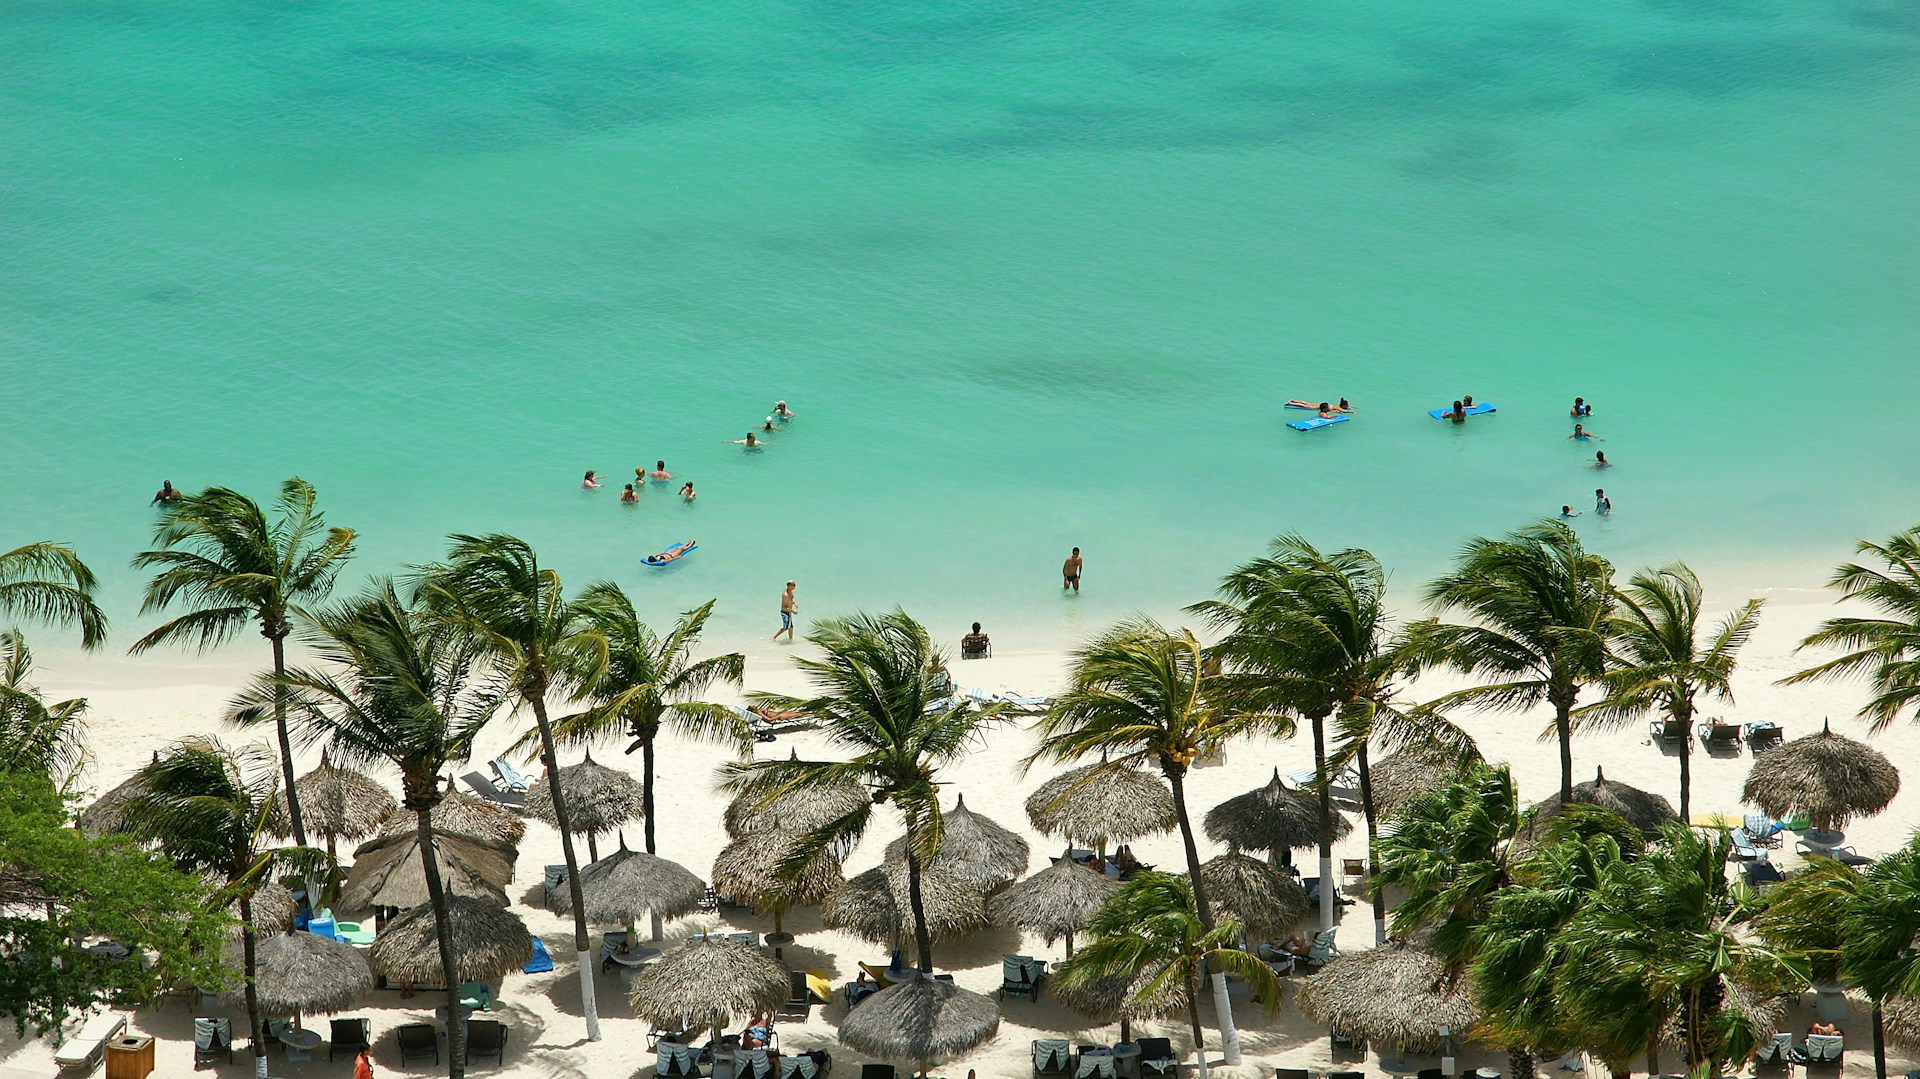 aerial photo of people at the beach during daytime